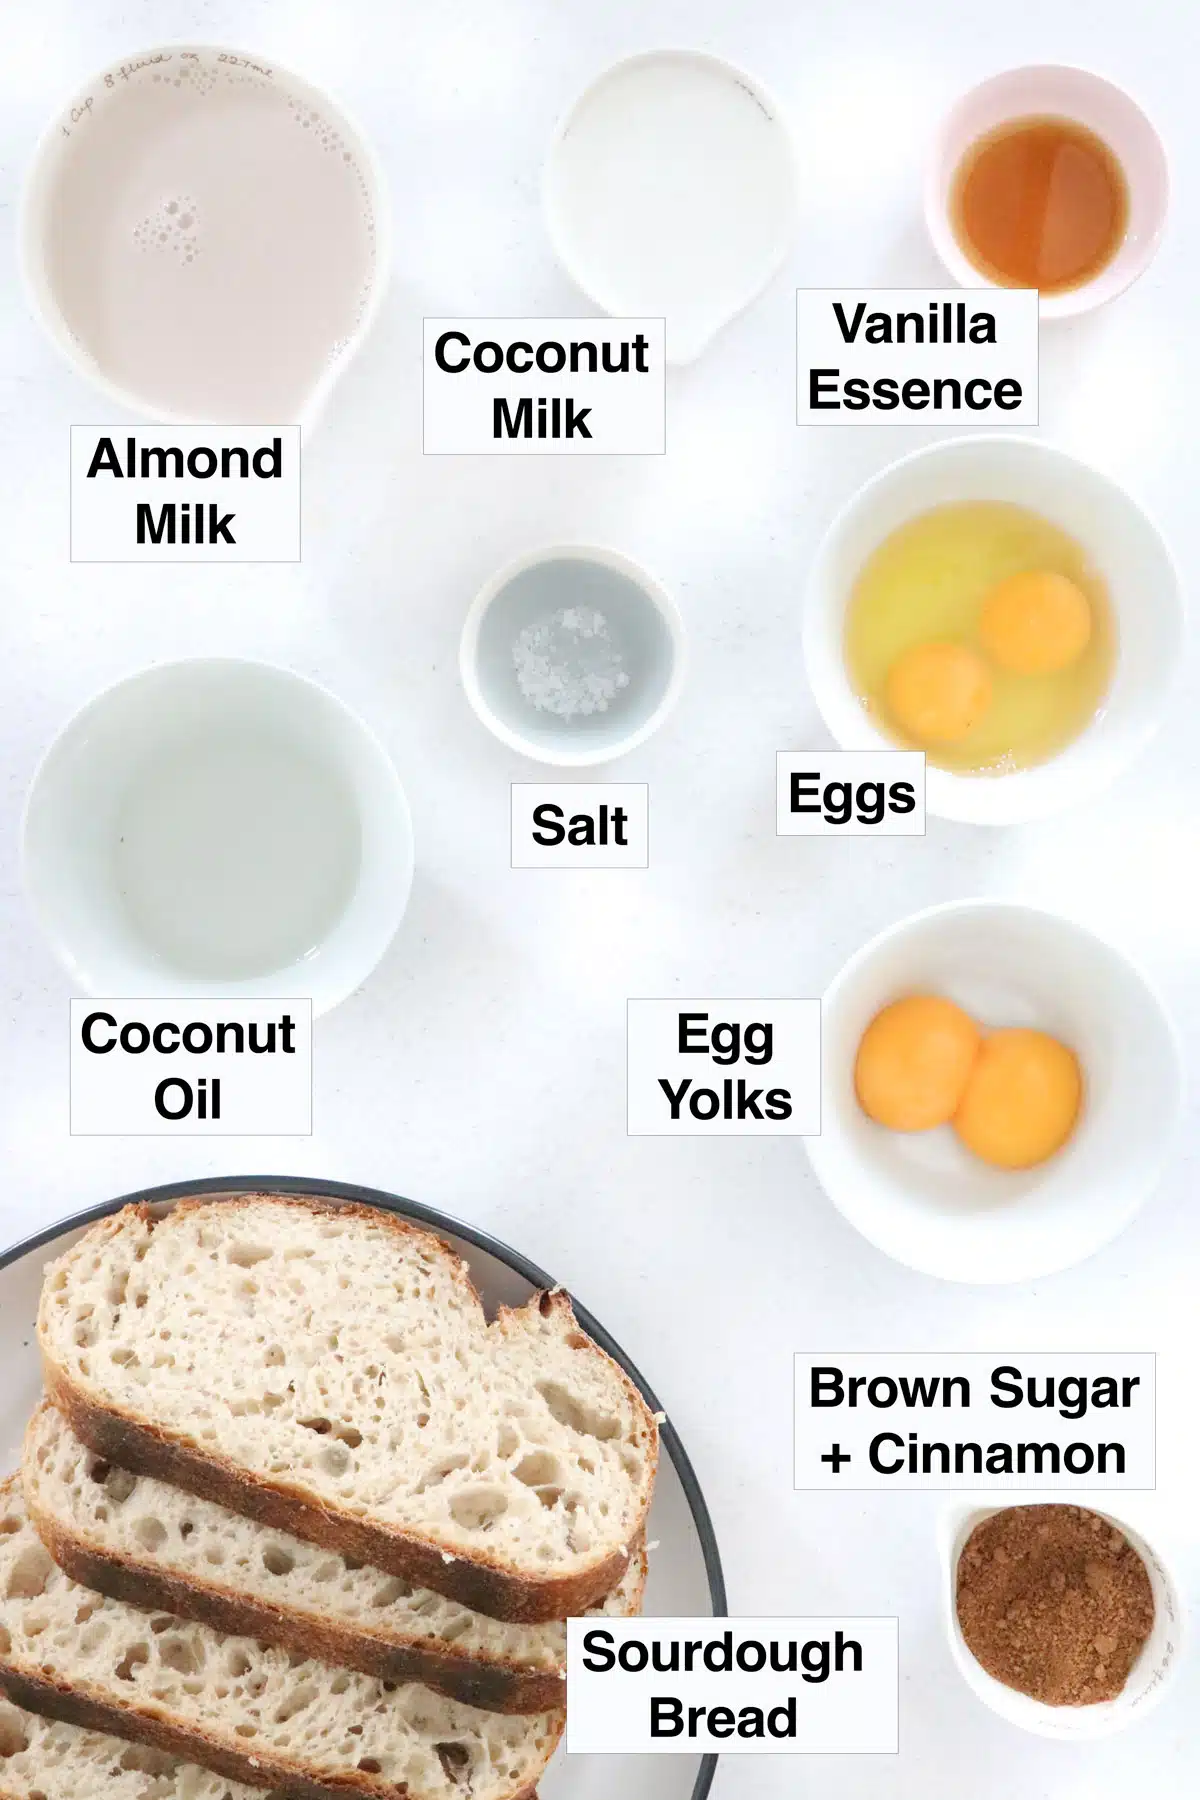 All the ingredients needed to make french toast are laid out across a table on plates and in bowls.